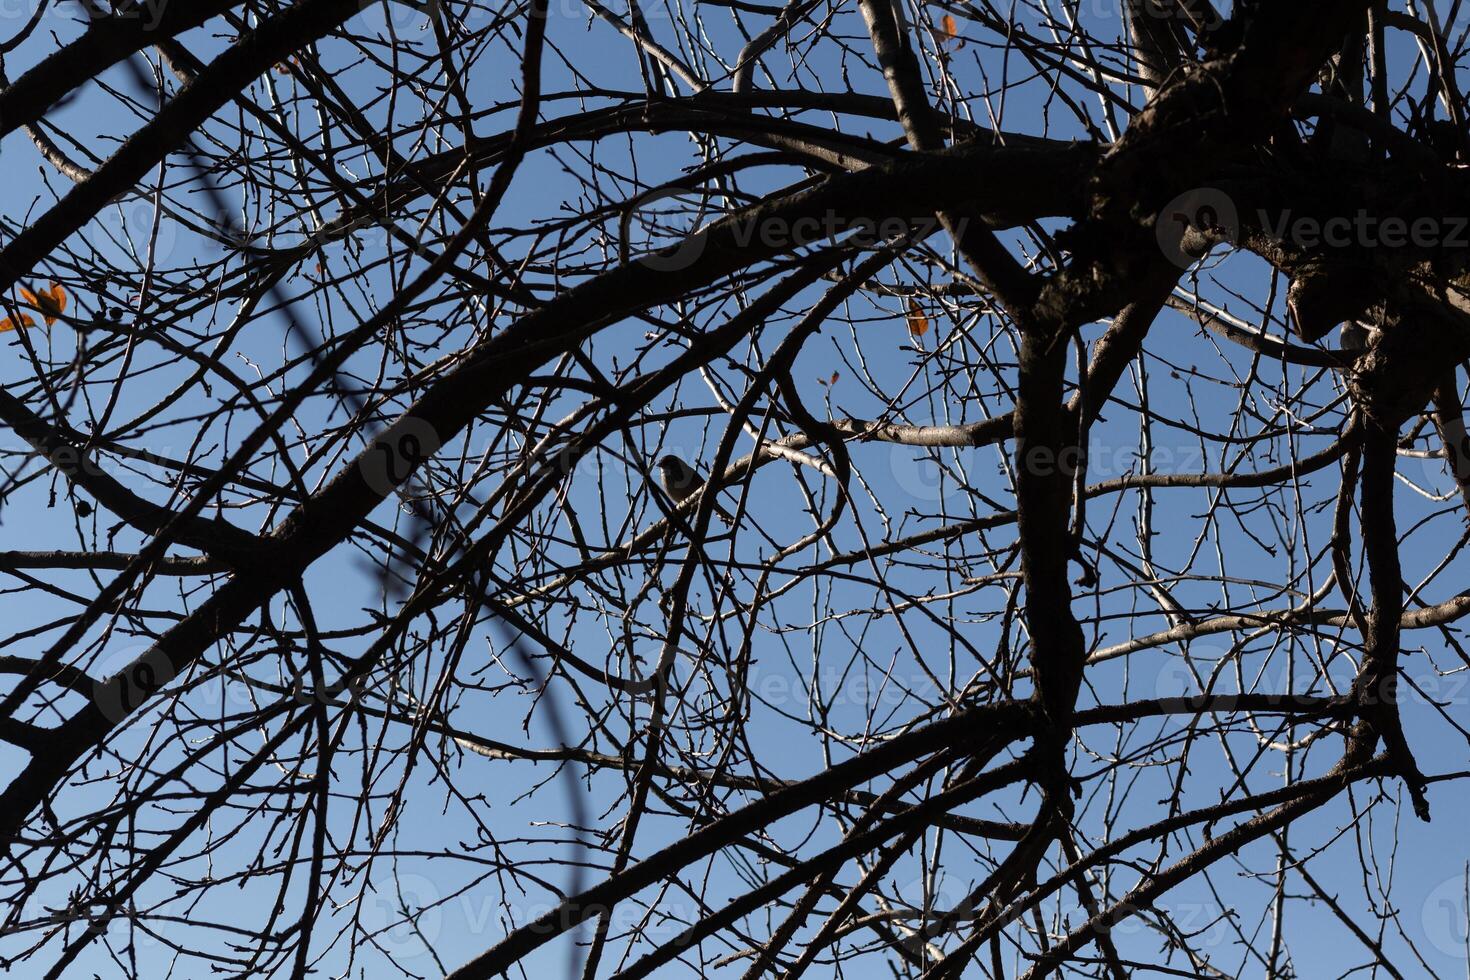 This cute little bird sat perched in the branches of this tree. Cautiously looking out for safety. The bare limbs helping to camouflage his body and keep him safe from predators. photo